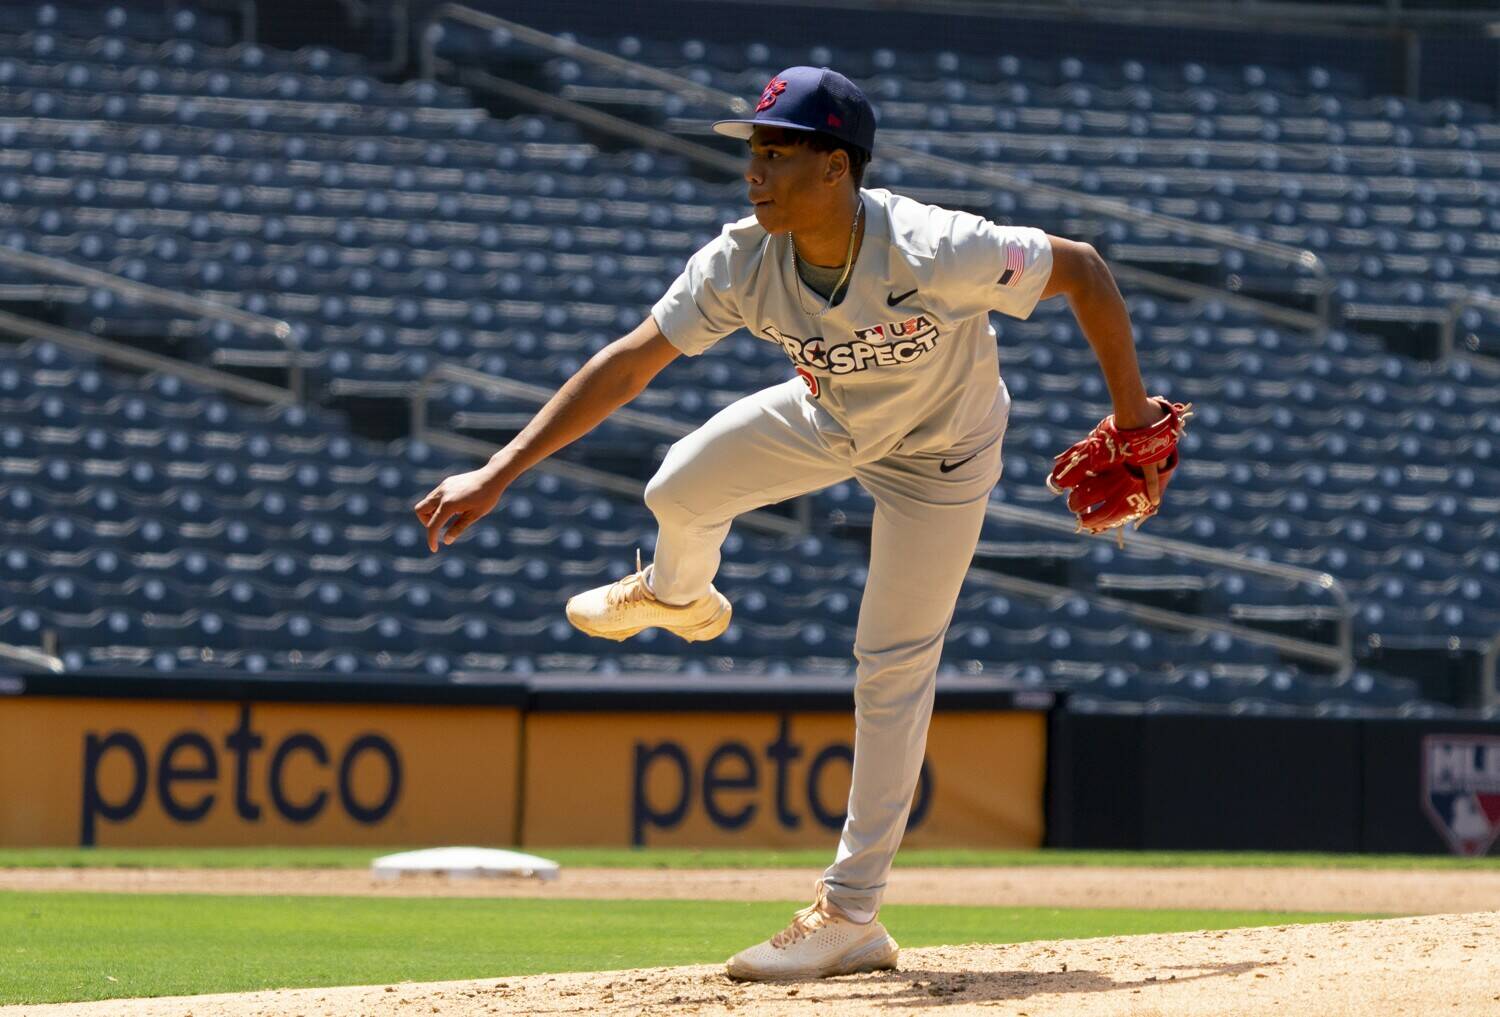 Jurrangelo Cijntje pitches at the 2022 MLB Draft Combine held at Petco Park on Wednesday, June 15, 2022 in San Diego, CA. Cijntje, from Mississippi State, was the Mariners’ first pick in the 2024 MLB Draft. (Nelvin C. Cepeda / The San Diego Union-Tribune)